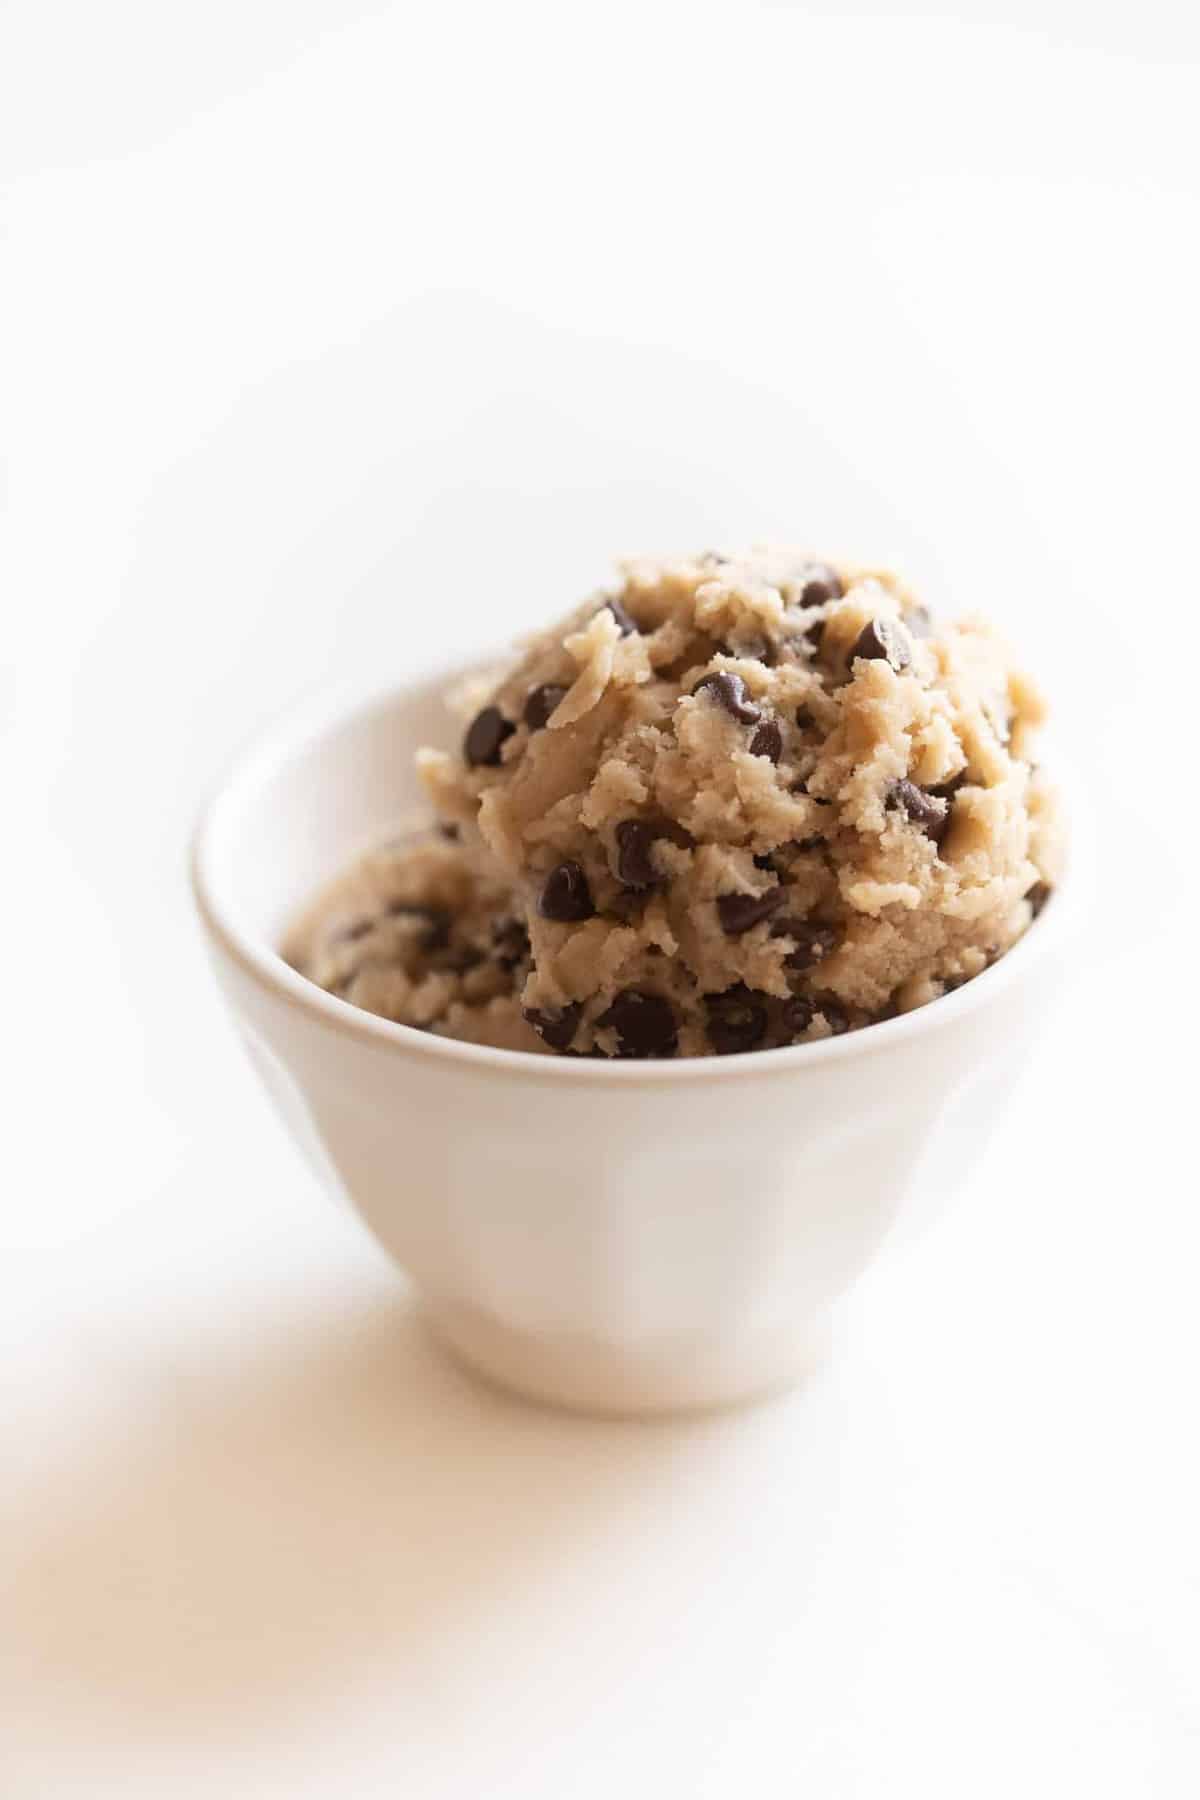 Two scoops of edible cookie dough in a white bowl